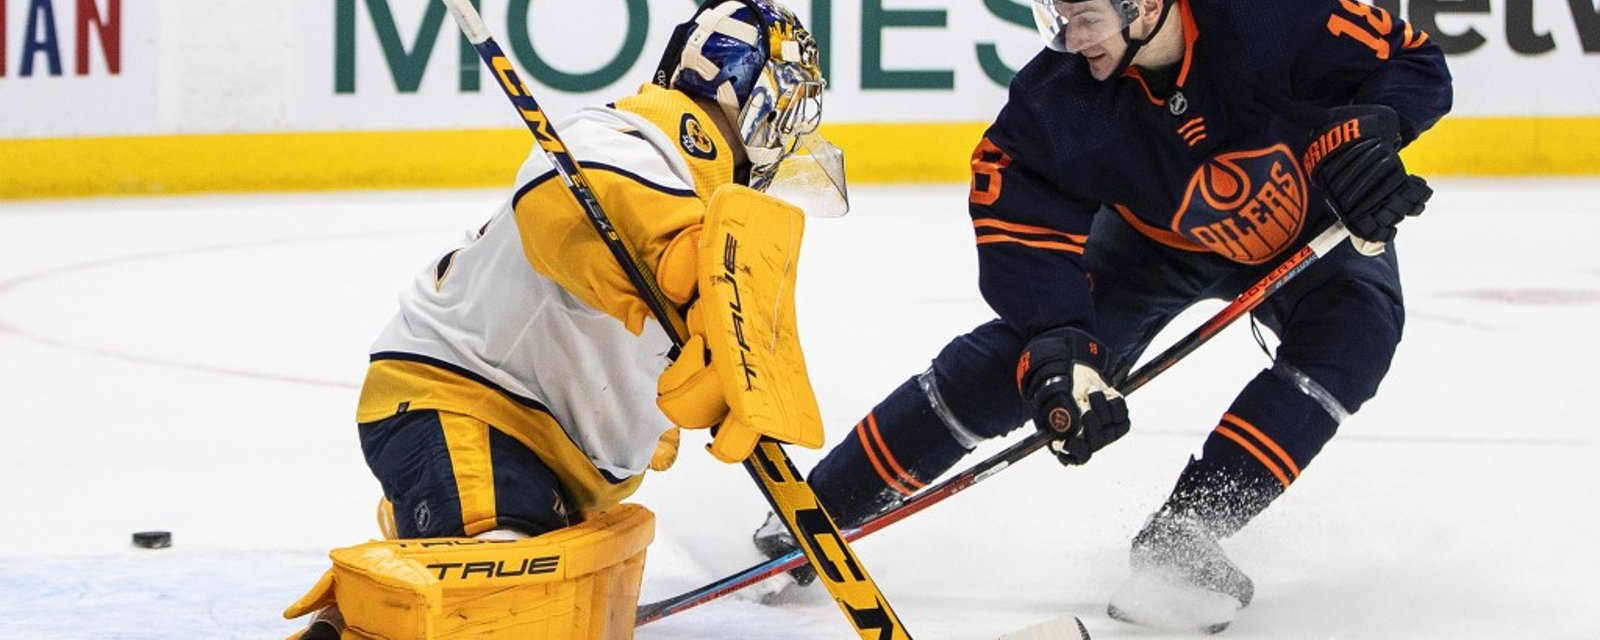 Asking price for Juuse Saros has been leaked and it is huge!